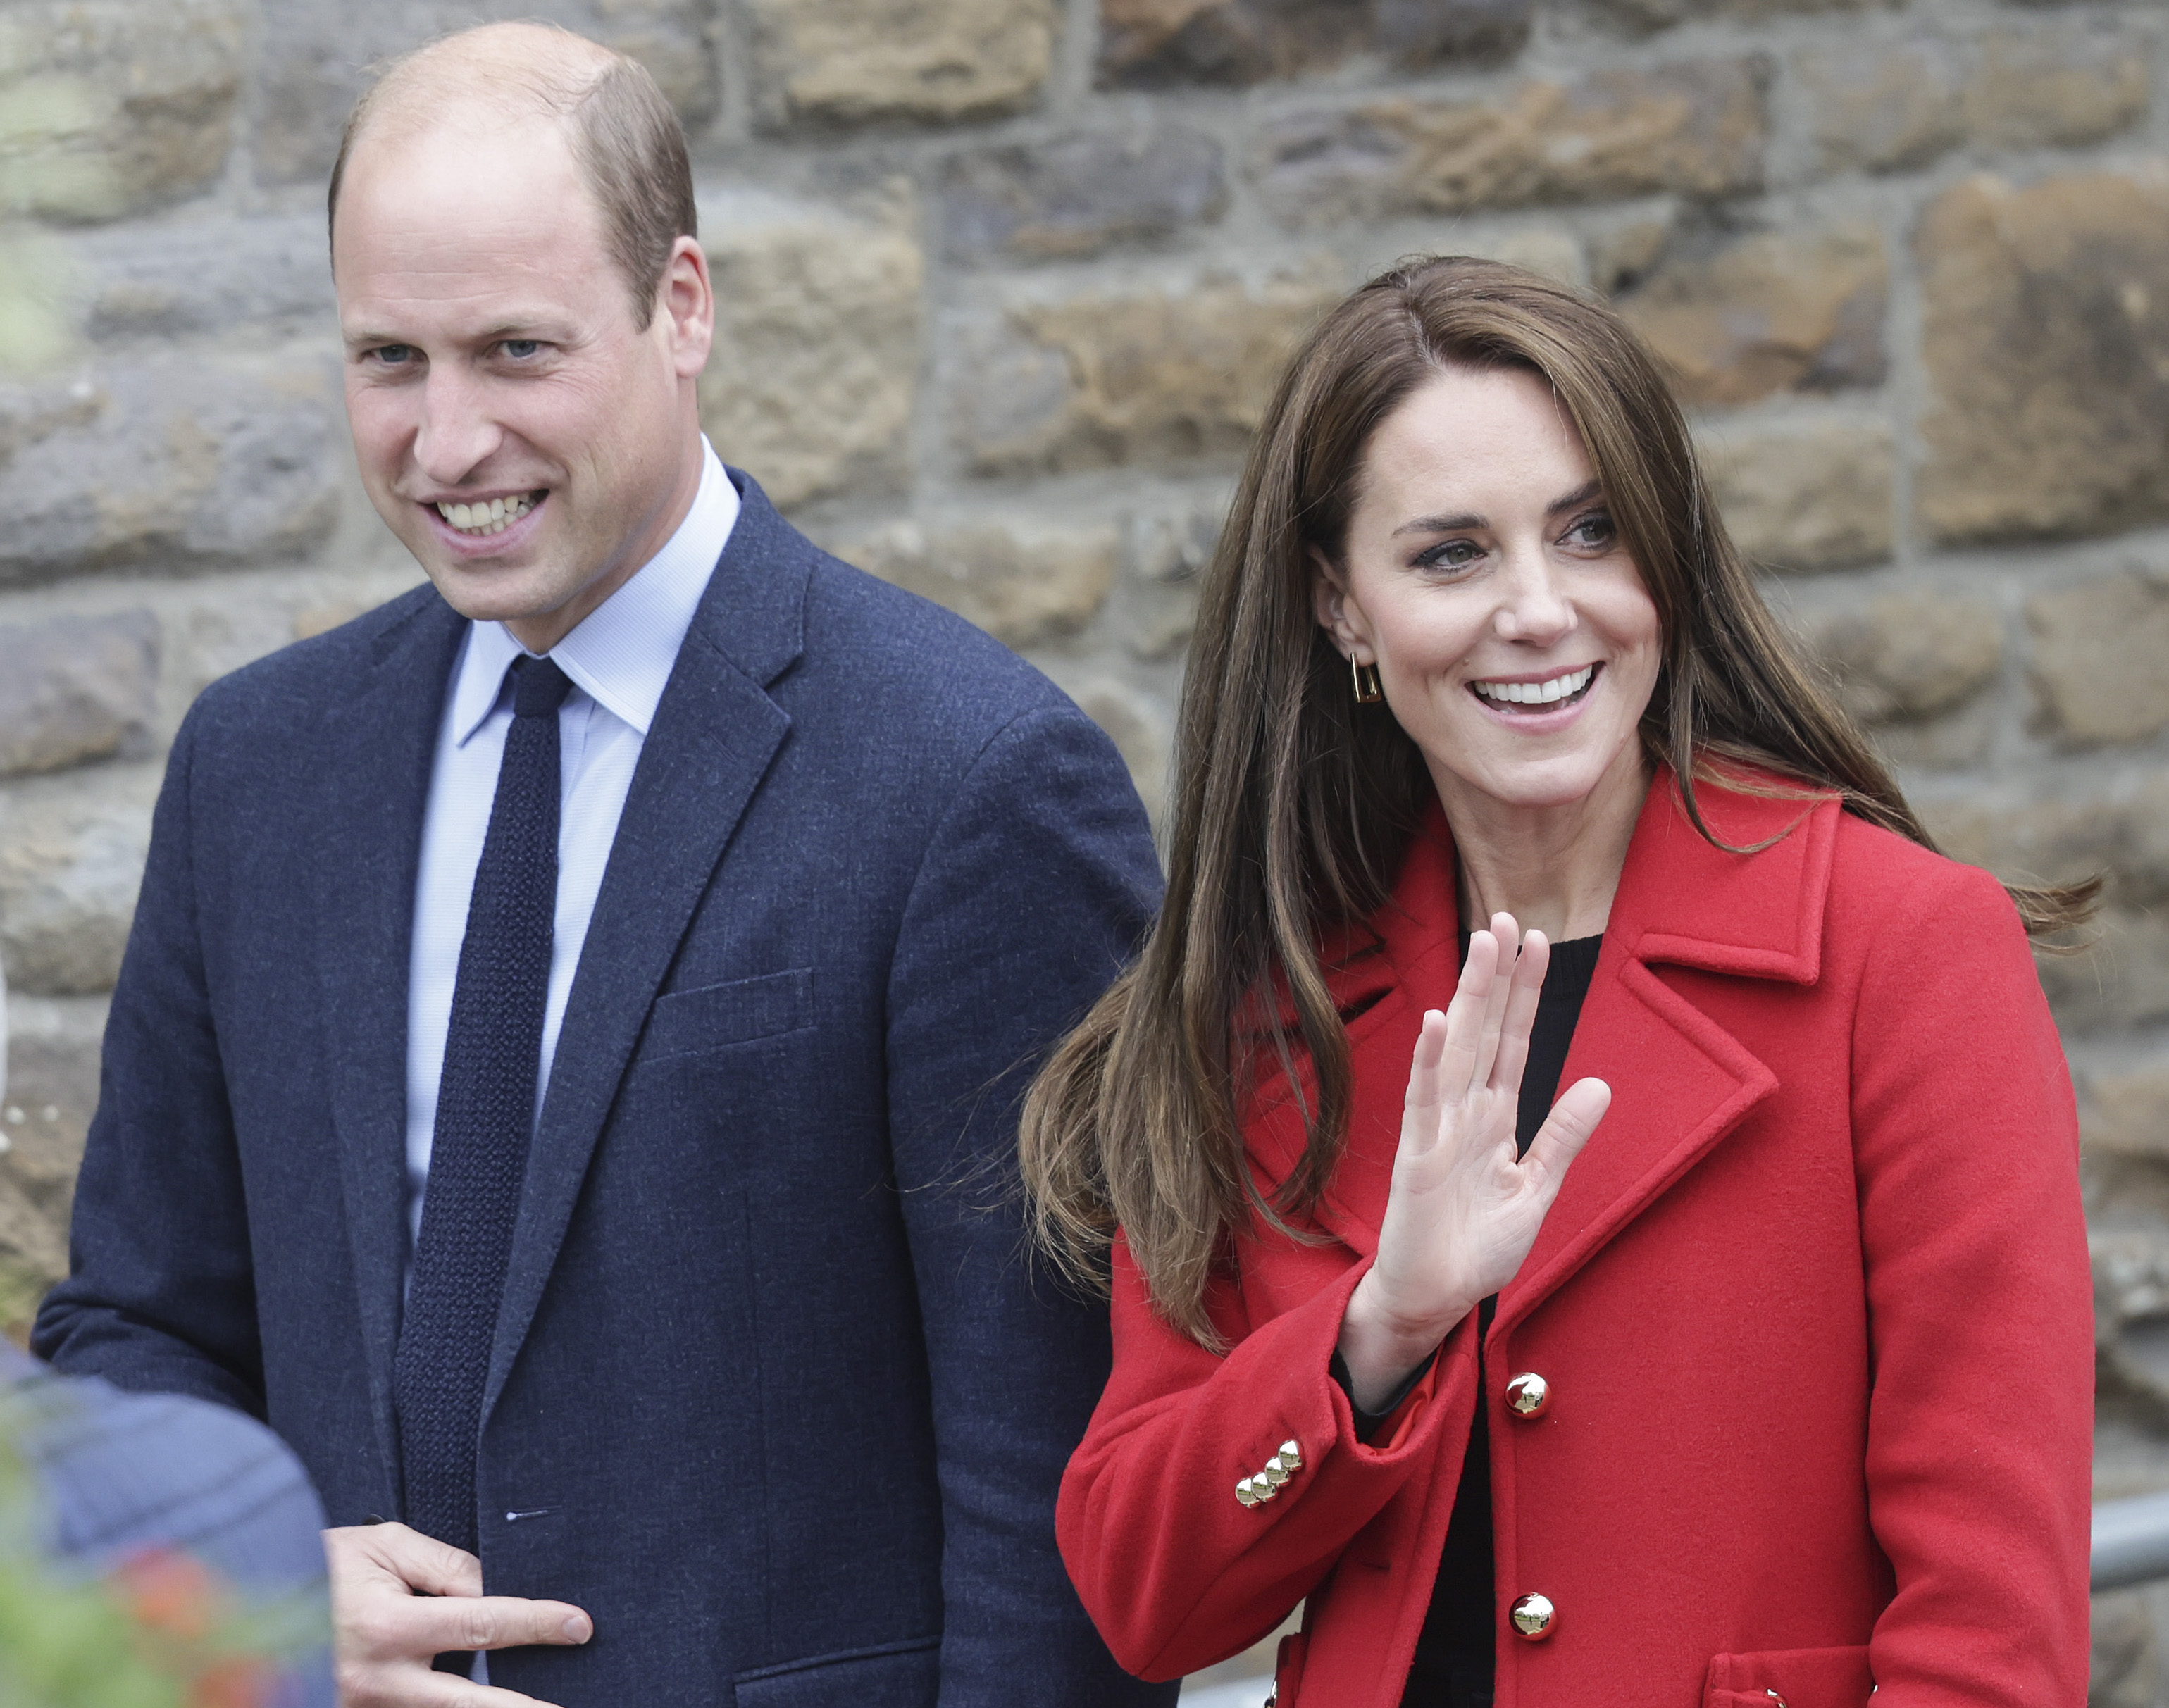 Prince William and Kate Middleton smile and wave to crowd as they leave church in Swansea, Wales